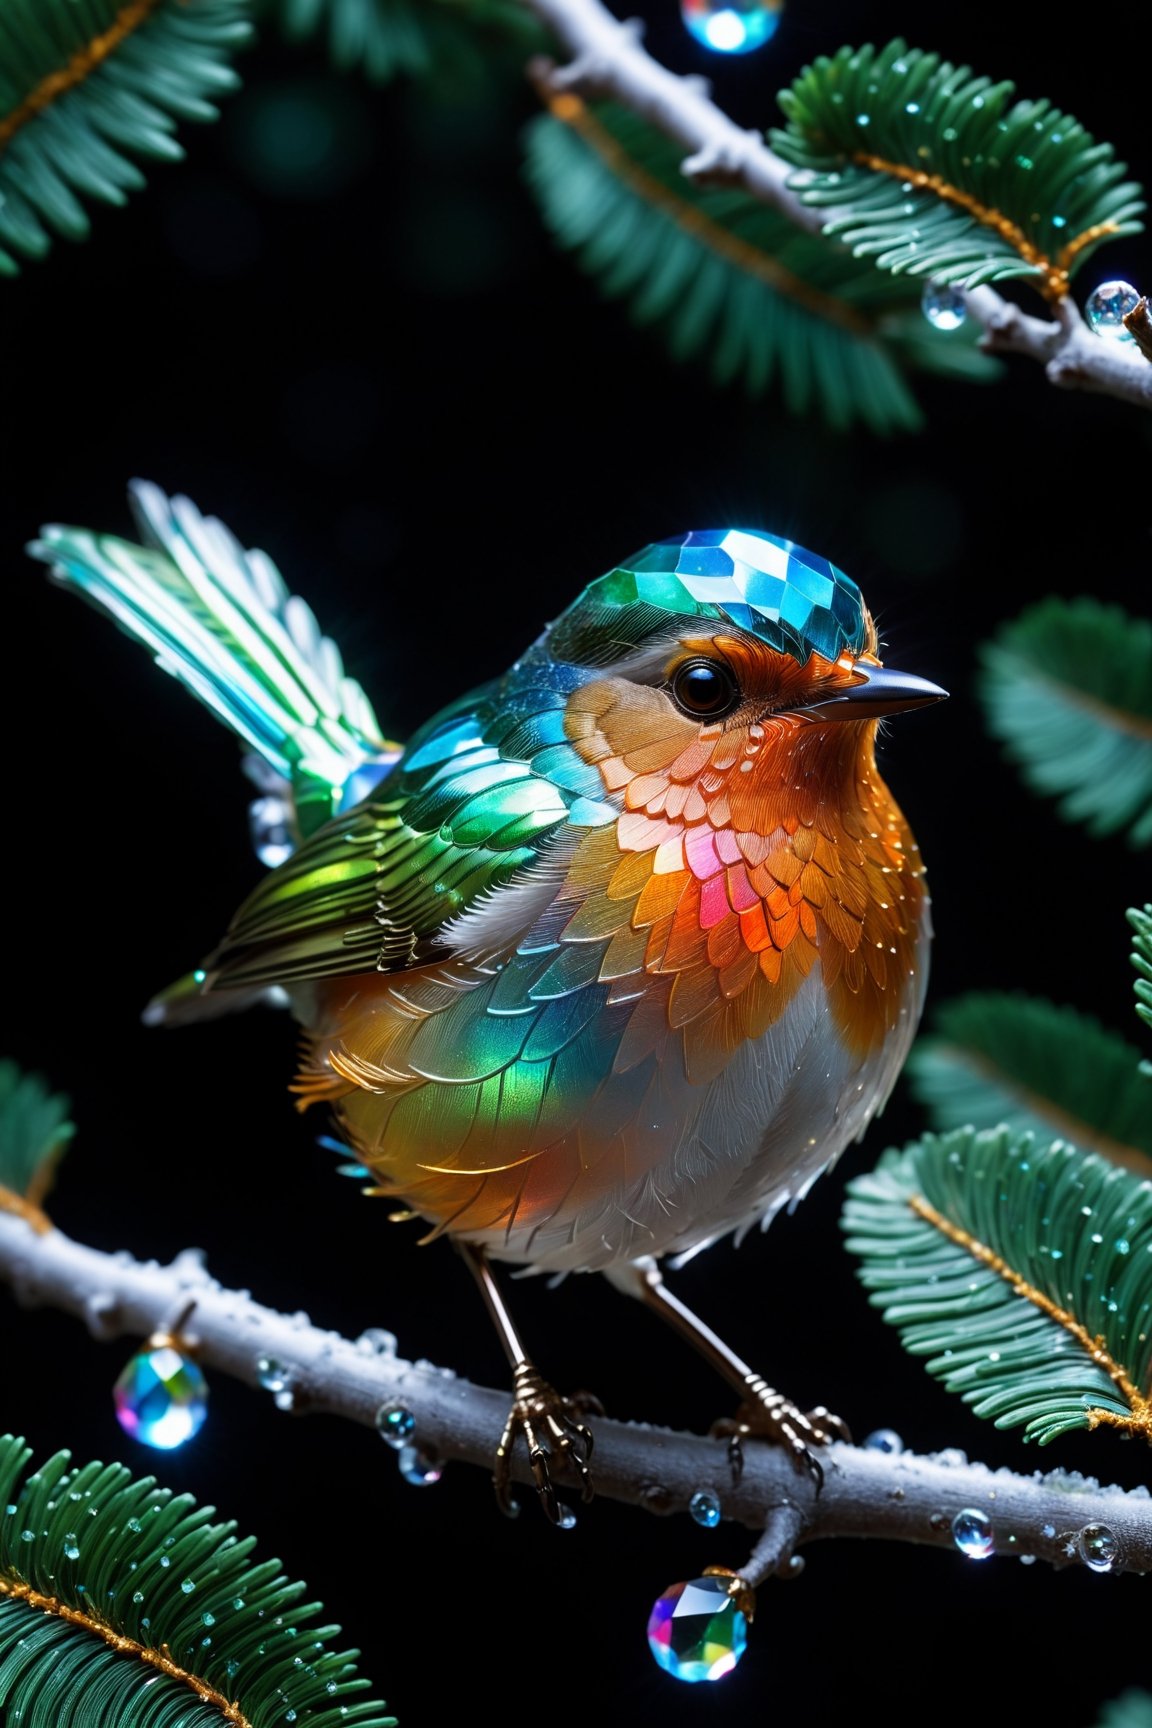 Highly detailed shot of an (((iridescence))) crystal sculpture in the shape of a European robin on a crystal tree branch, often associated with the arrival of spring. In folklore, the robin is sometimes depicted as a symbol of good luck or as a harbinger of news from the spirit world, vibrant background, full motion effects, diagonal view, crystal particles glittering, back light, ultra sharp focus, high speed shot, vibrant color, Bioluminescence, high quality

